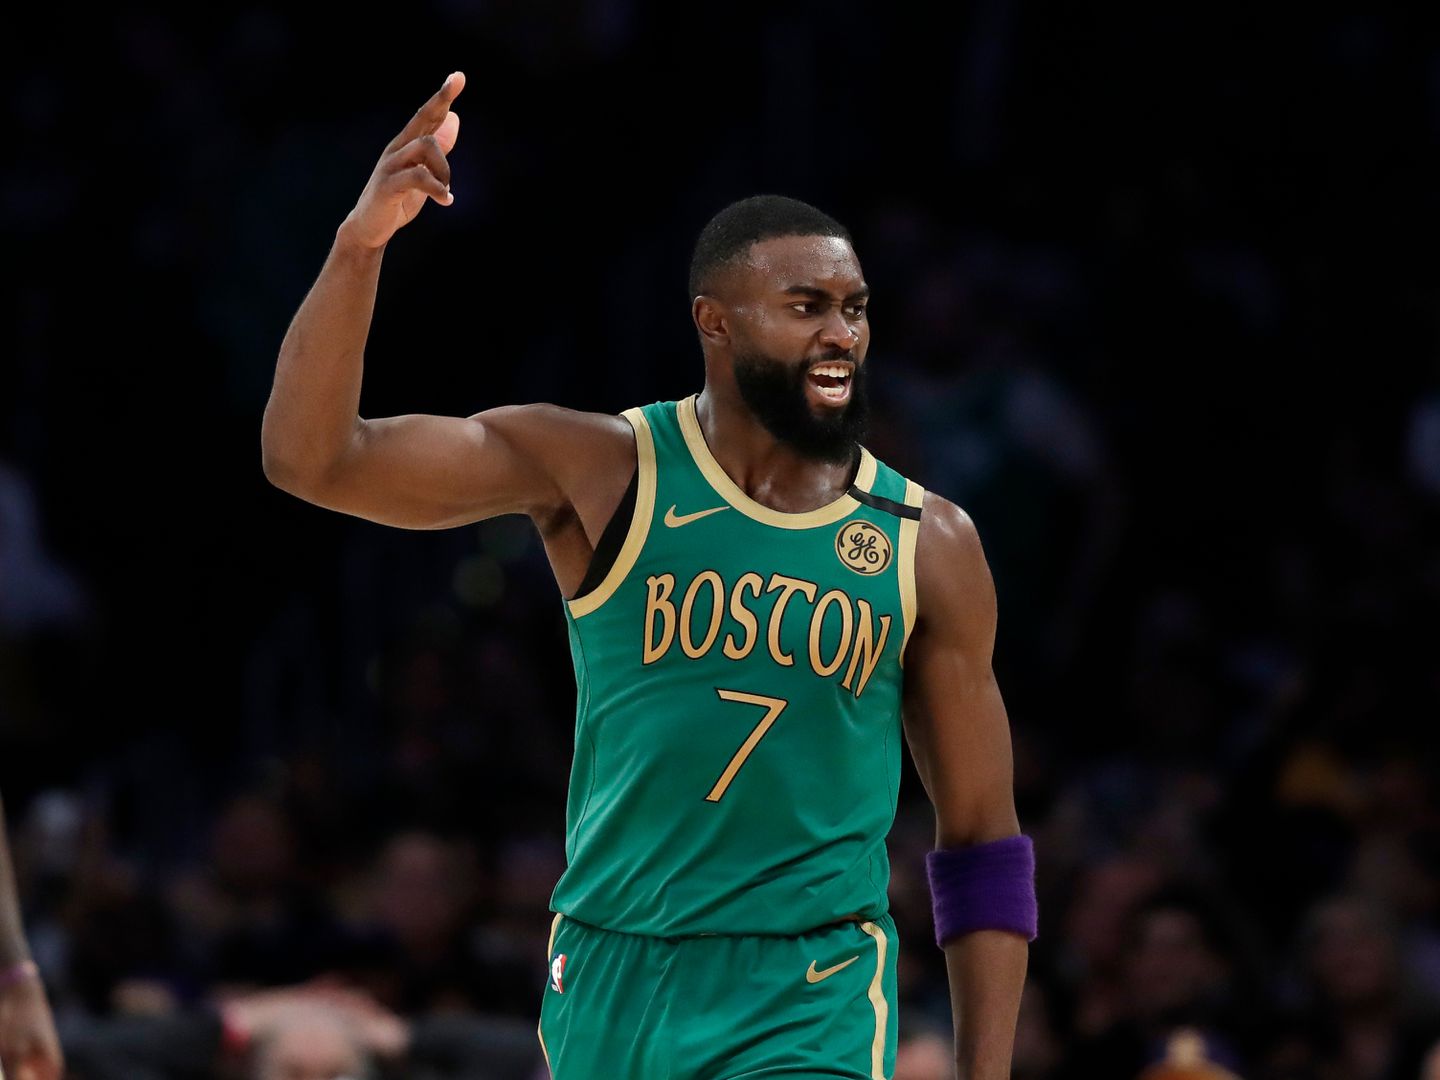 Celtics fans booed Jaylen Brown on draft night. There’s no excuse for